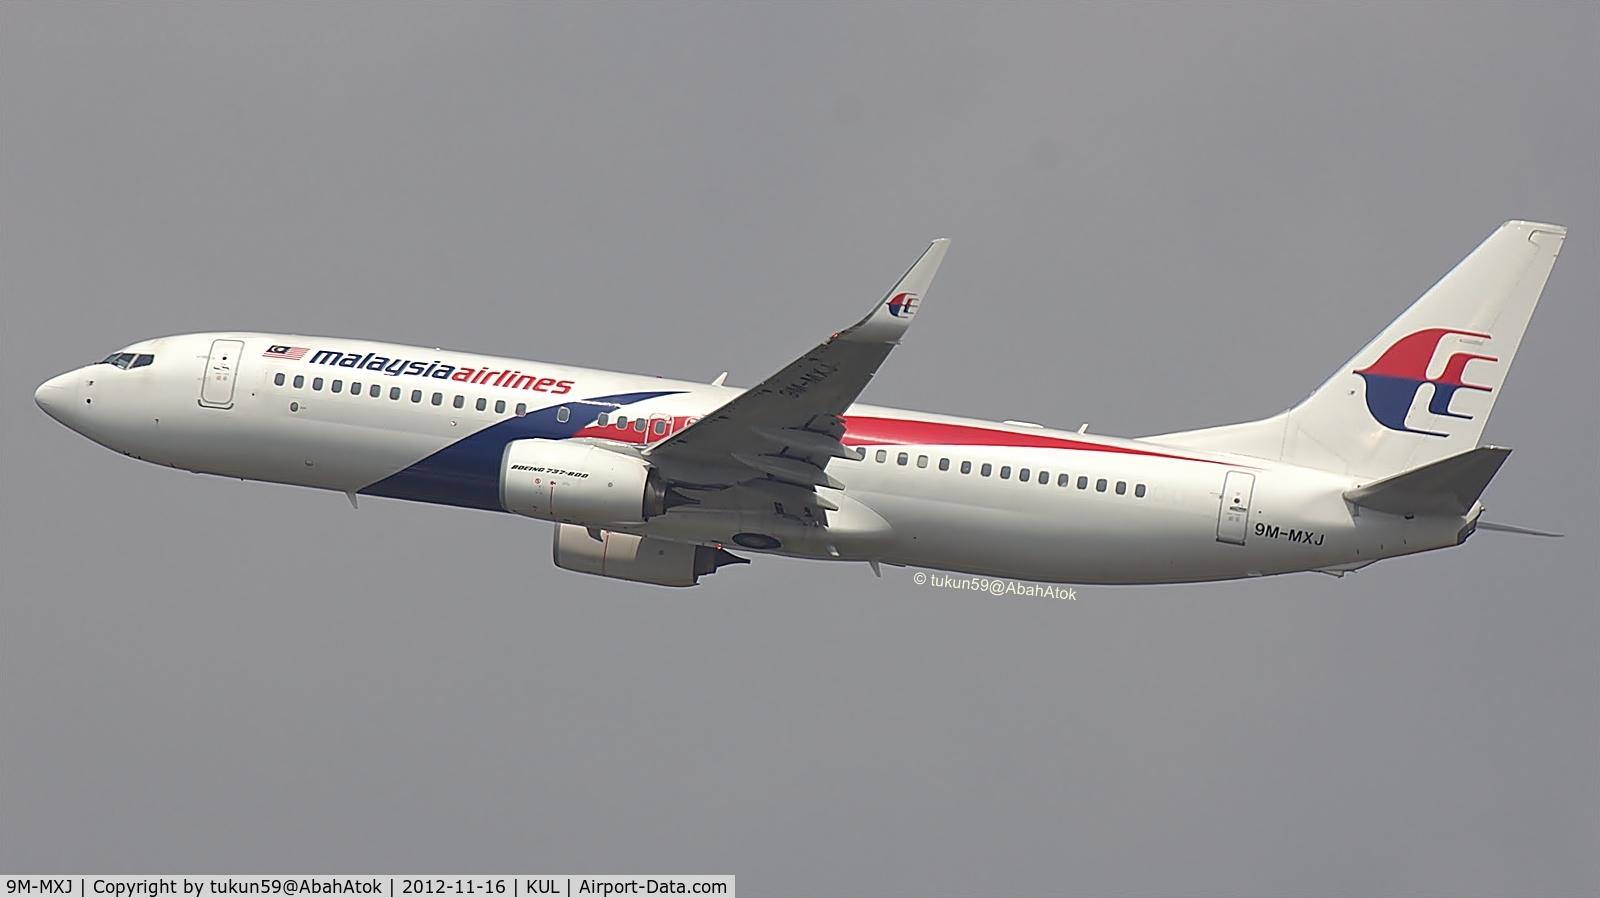 9M-MXJ, 2012 Boeing 737-8H6 C/N 40137, Malaysia Airlines